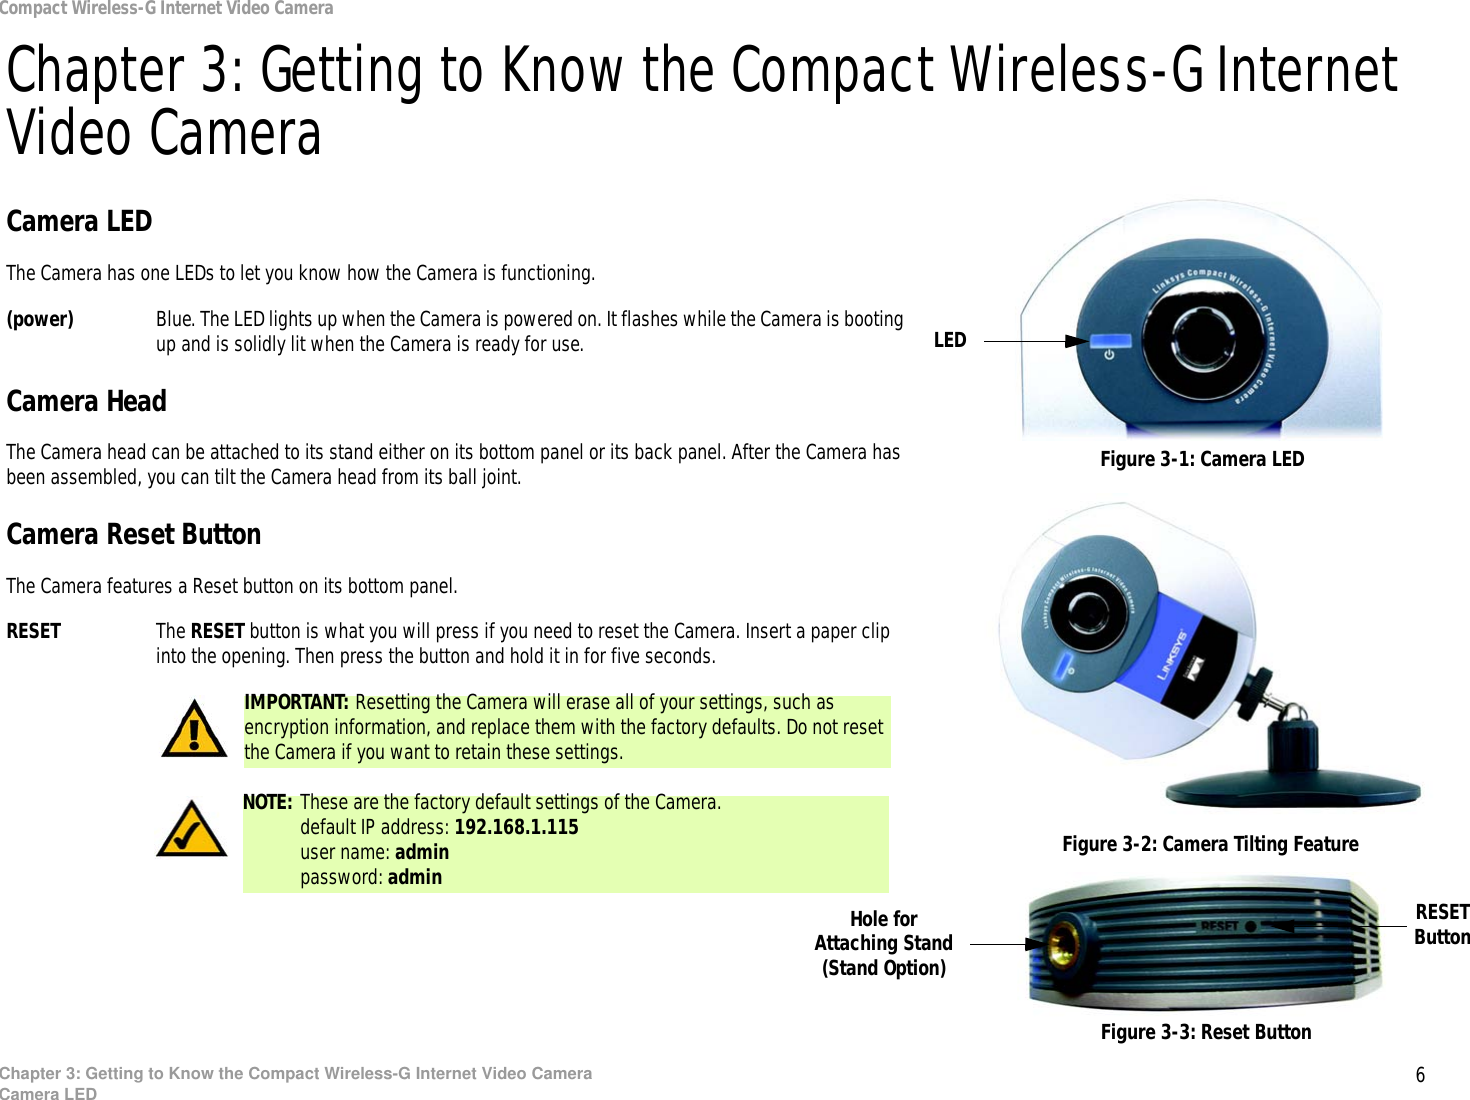 6Chapter 3: Getting to Know the Compact Wireless-G Internet Video CameraCamera LEDCompact Wireless-G Internet Video CameraChapter 3: Getting to Know the Compact Wireless-G Internet Video CameraCamera LEDThe Camera has one LEDs to let you know how the Camera is functioning.(power) Blue. The LED lights up when the Camera is powered on. It flashes while the Camera is booting up and is solidly lit when the Camera is ready for use.Camera HeadThe Camera head can be attached to its stand either on its bottom panel or its back panel. After the Camera has been assembled, you can tilt the Camera head from its ball joint.Camera Reset ButtonThe Camera features a Reset button on its bottom panel.RESET The RESET button is what you will press if you need to reset the Camera. Insert a paper clip into the opening. Then press the button and hold it in for five seconds.Figure 3-1: Camera LEDFigure 3-2: Camera Tilting FeatureLEDFigure 3-3: Reset ButtonIMPORTANT: Resetting the Camera will erase all of your settings, such as encryption information, and replace them with the factory defaults. Do not reset the Camera if you want to retain these settings.Hole for Attaching Stand (Stand Option)NOTE: These are the factory default settings of the Camera.default IP address: 192.168.1.115user name: adminpassword: adminRESET Button